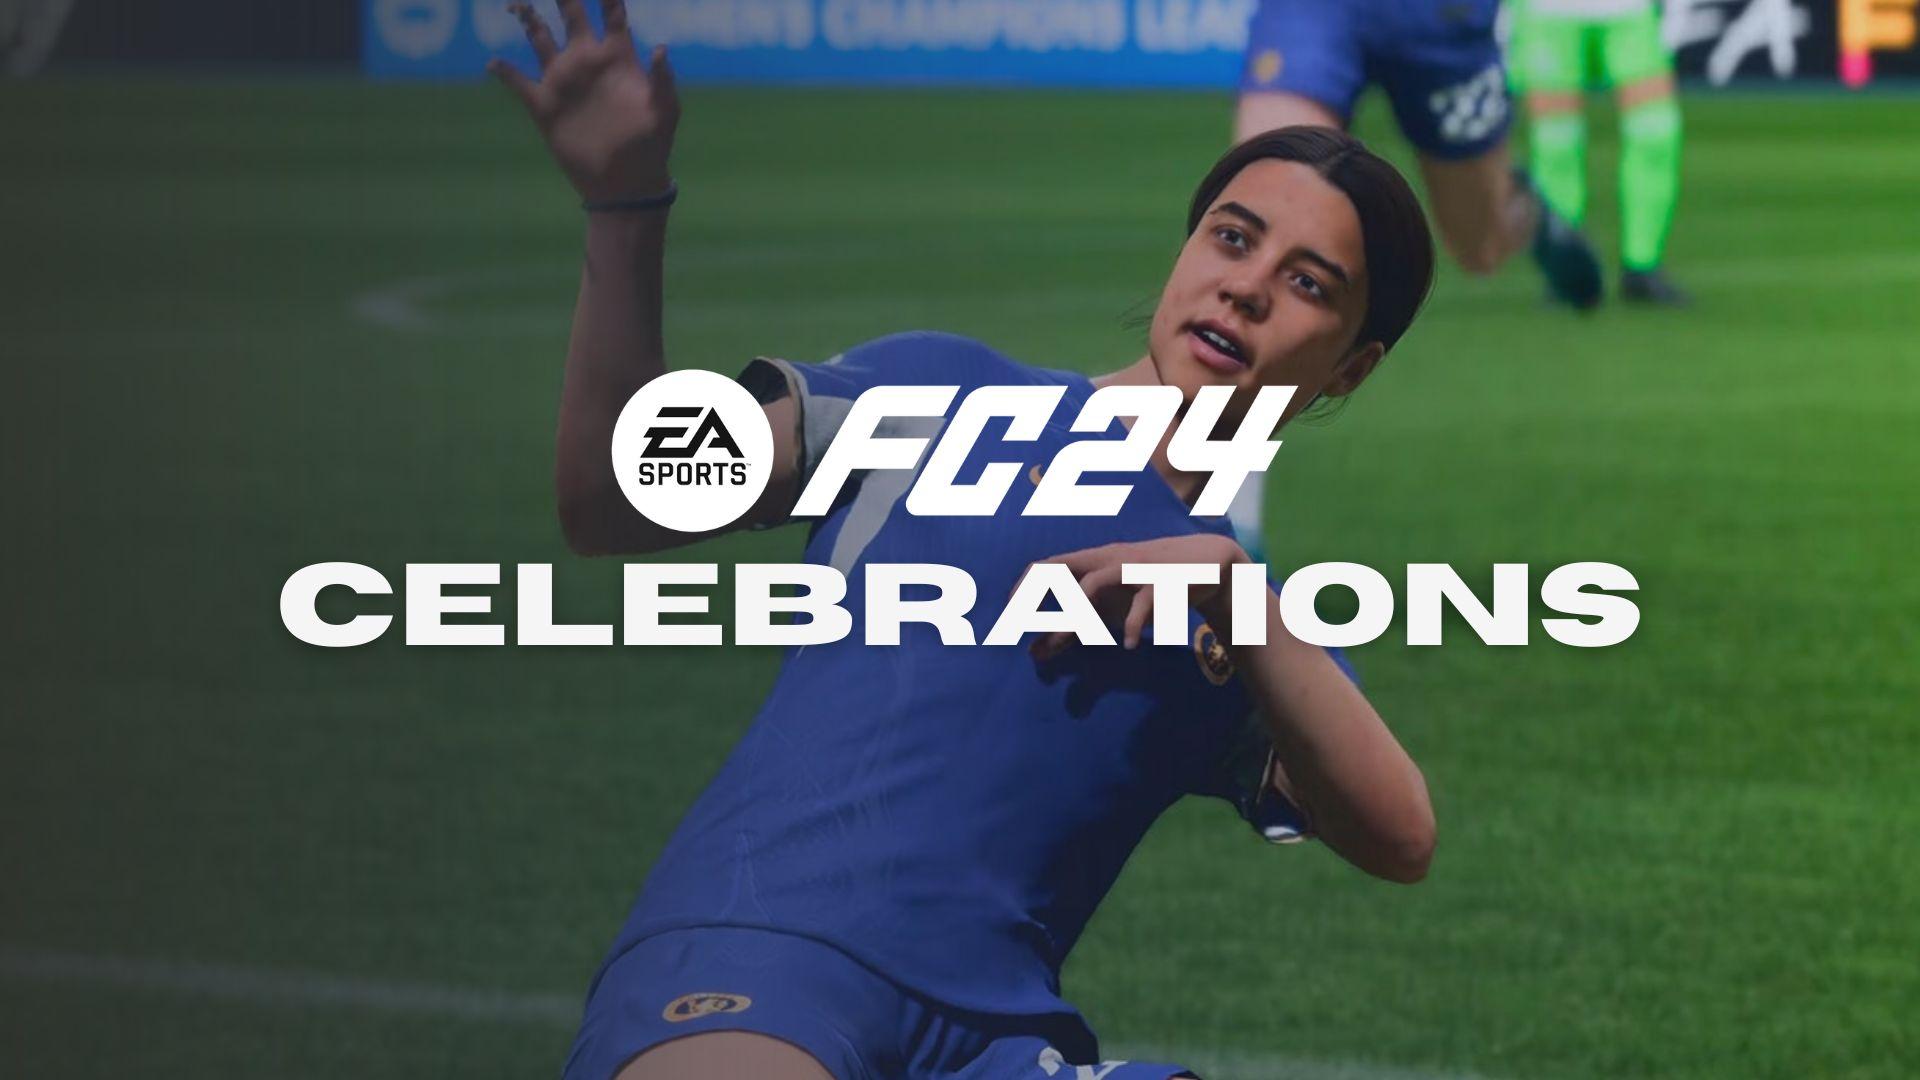 Sam Kerr in EA FC 24 sliding on knees with celebrations text and logo on top